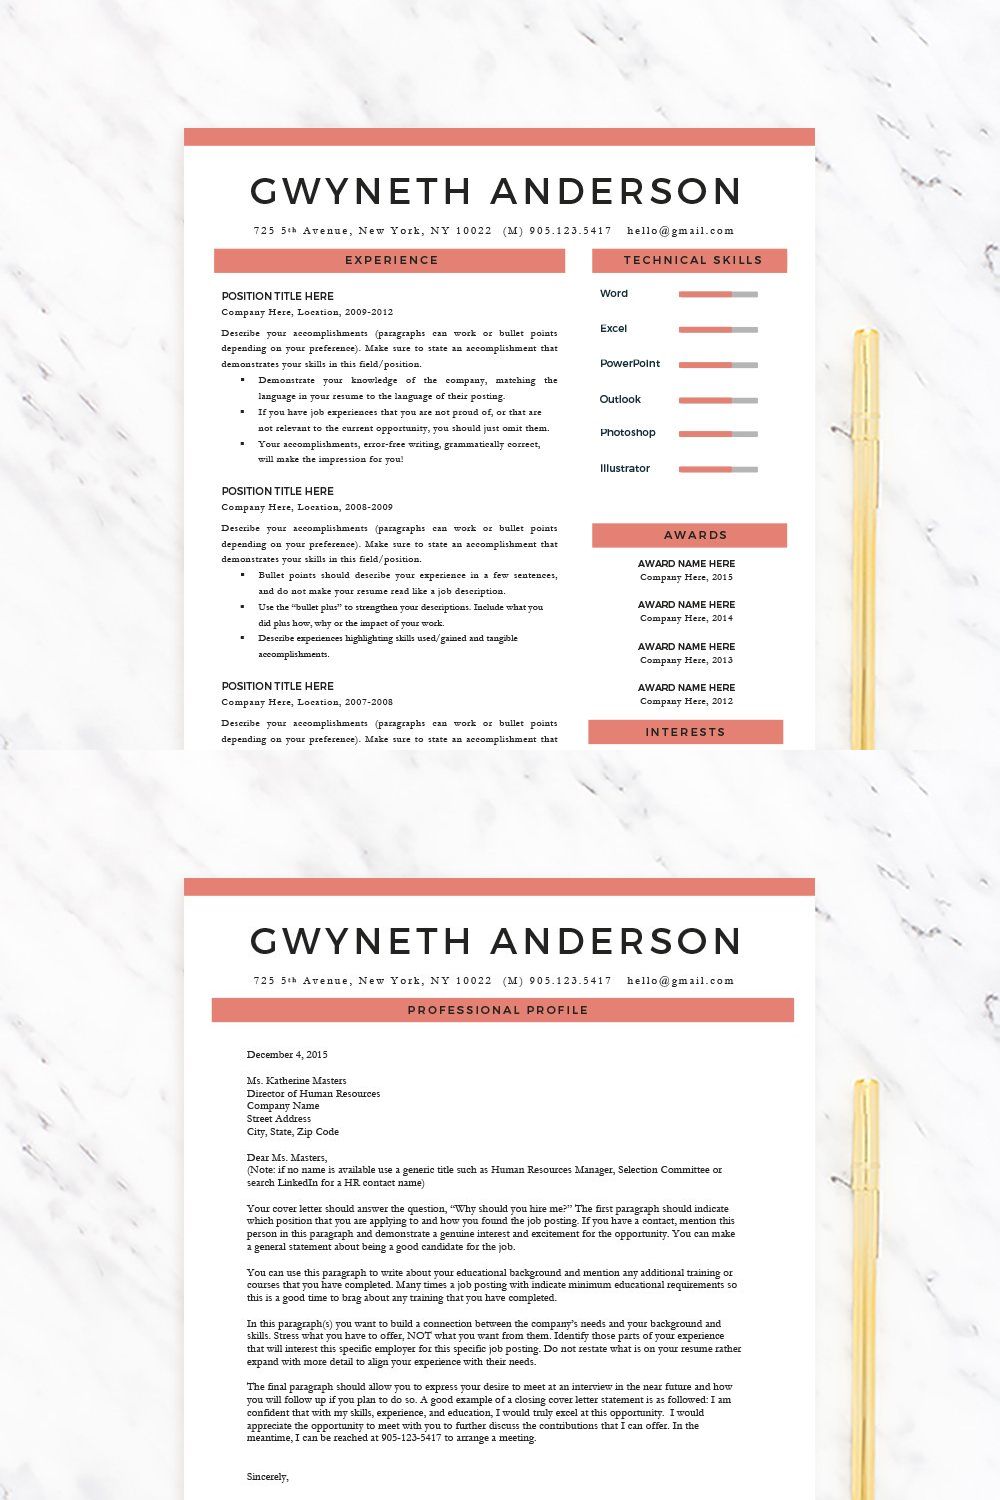 Resume Template "Gwyneth" pinterest preview image.